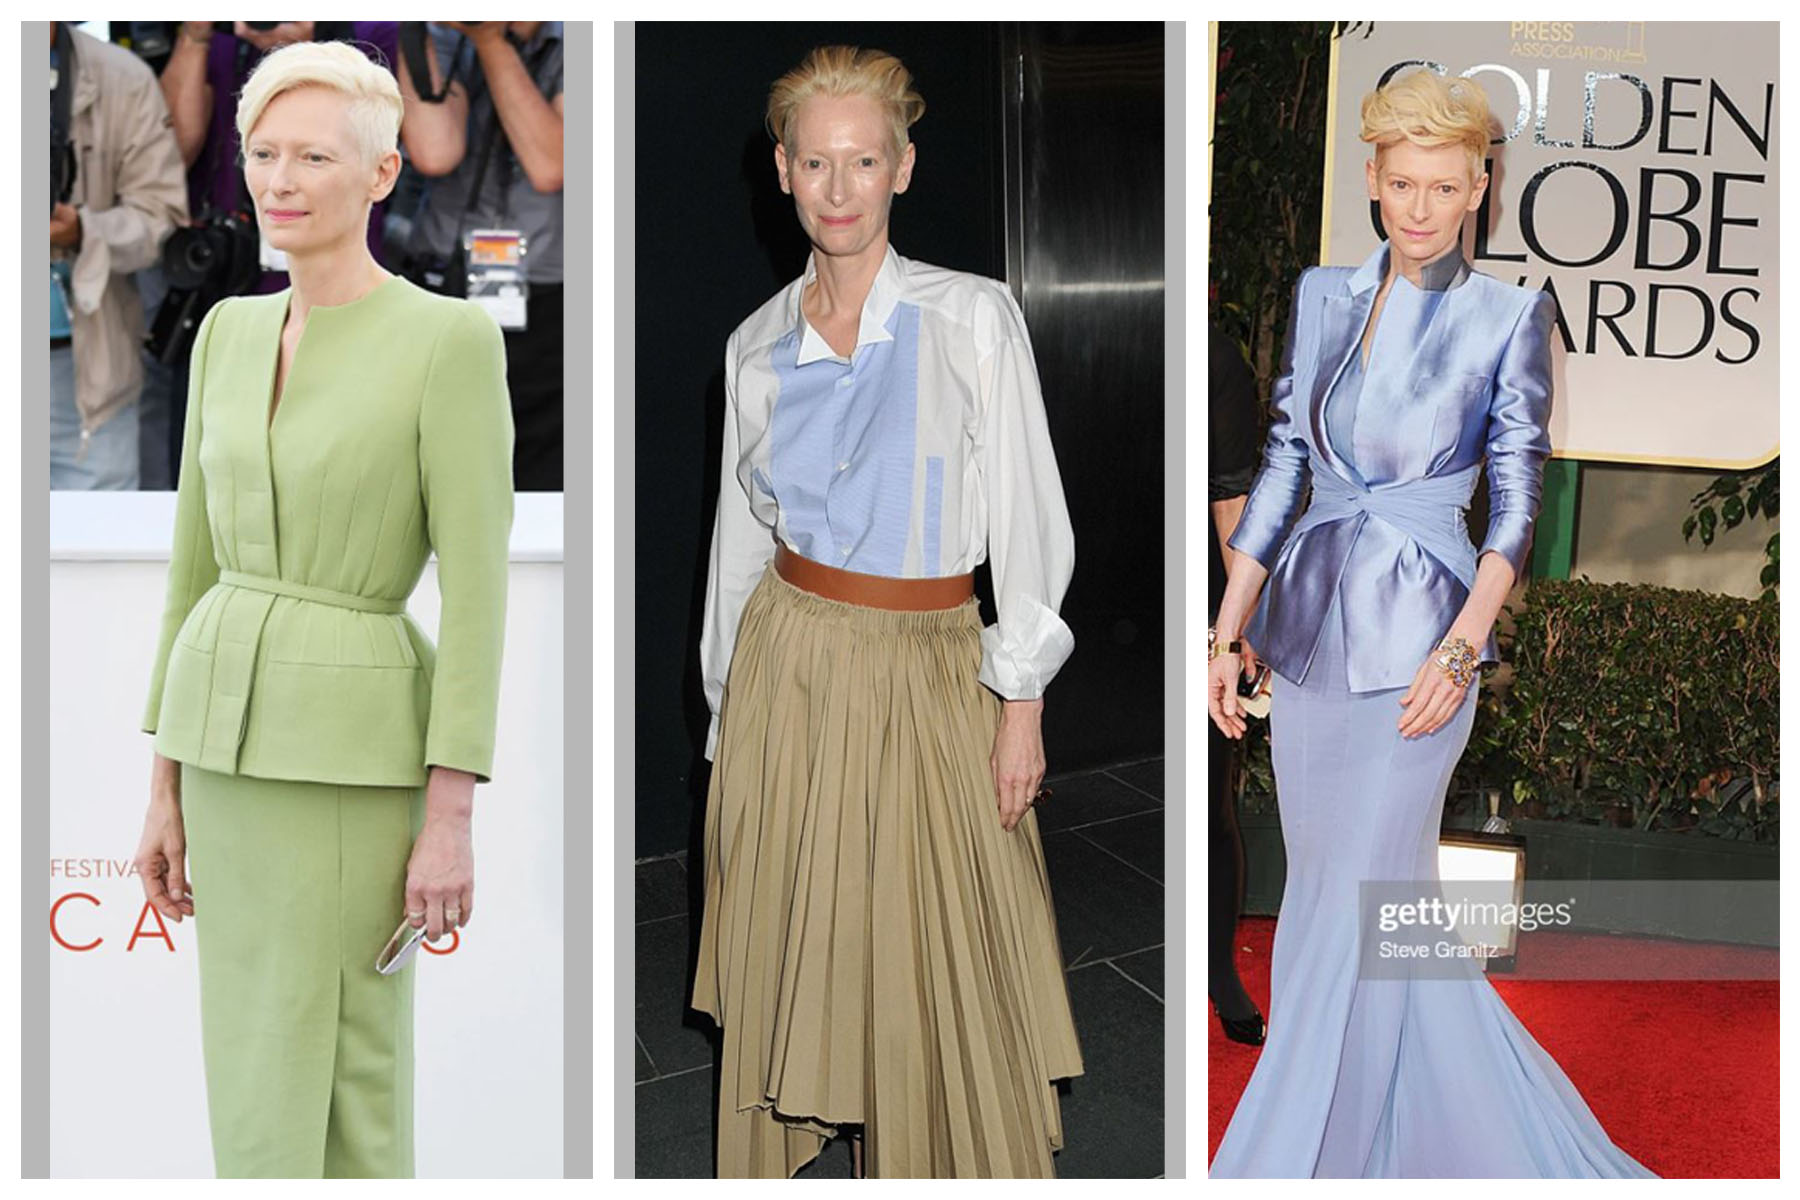 Acxtress Tilda Swinton looks very elegant and sometimes edgy in her skirt looks